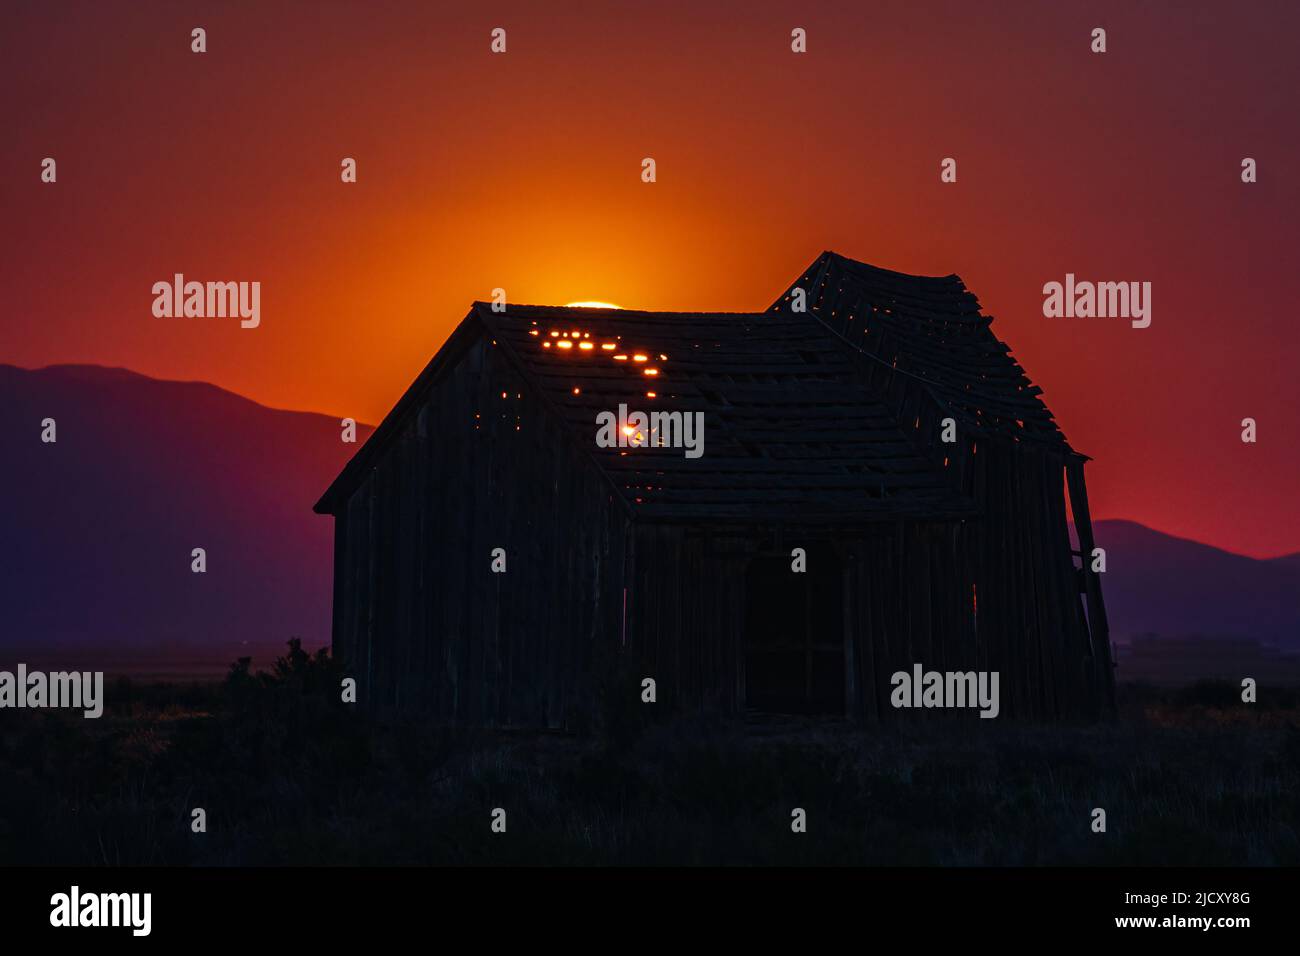 Old barn backlit by a rising full moon casting an eerie orange glow through the slats and silhouetting the building. Stock Photo